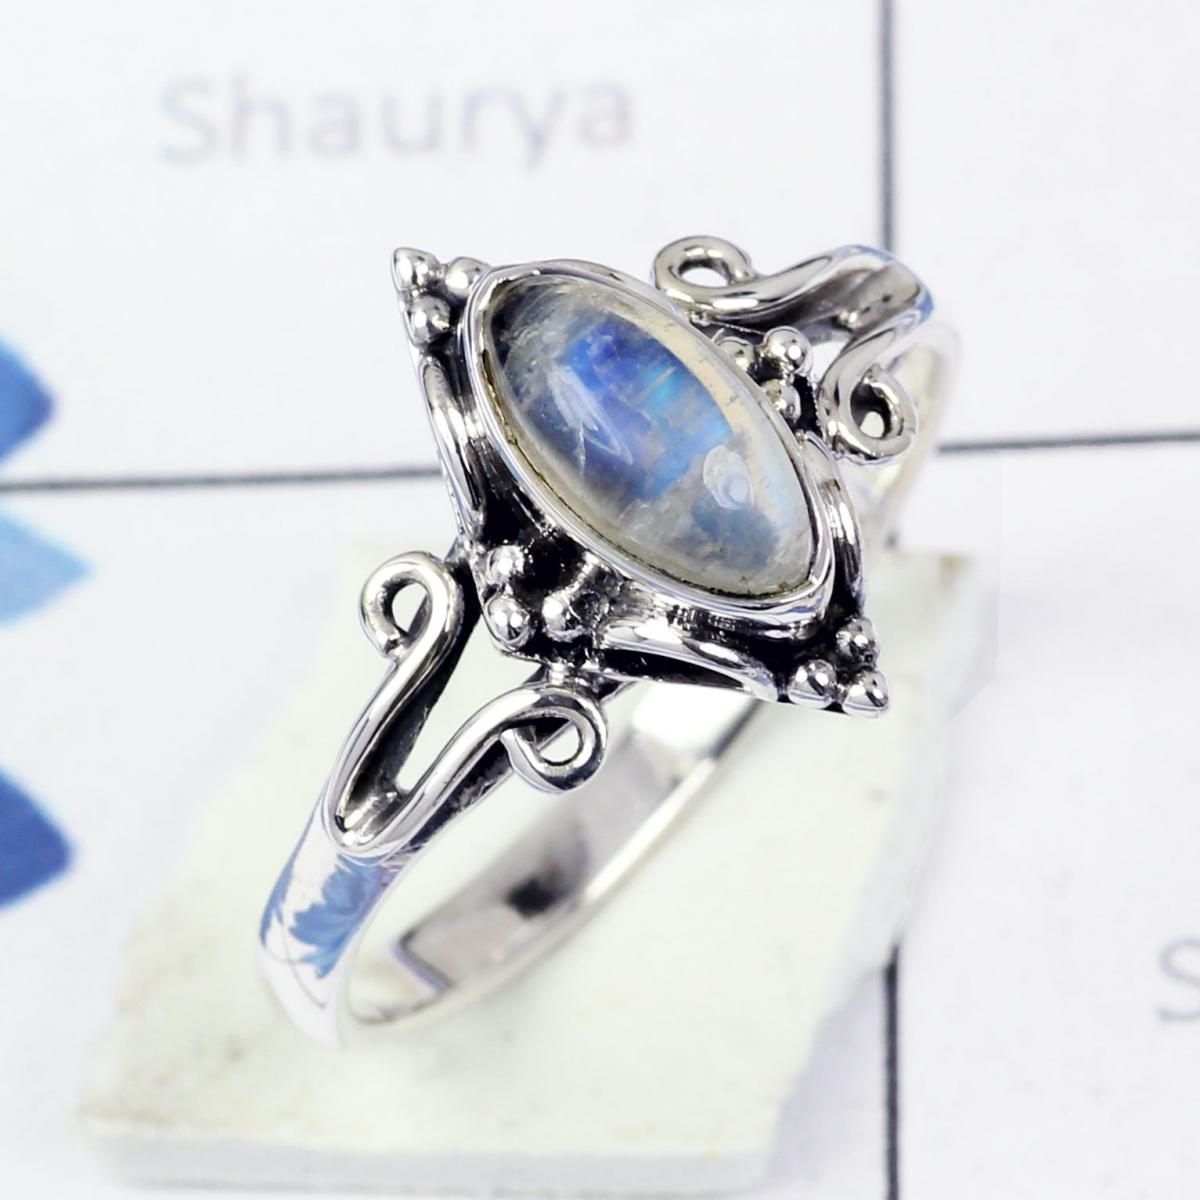 RAINBOW MOONSTONE B - BDR956- EXCLUSIVE NEW COLLECTION OF RAINBOW MOONSTONE RINGS MADE